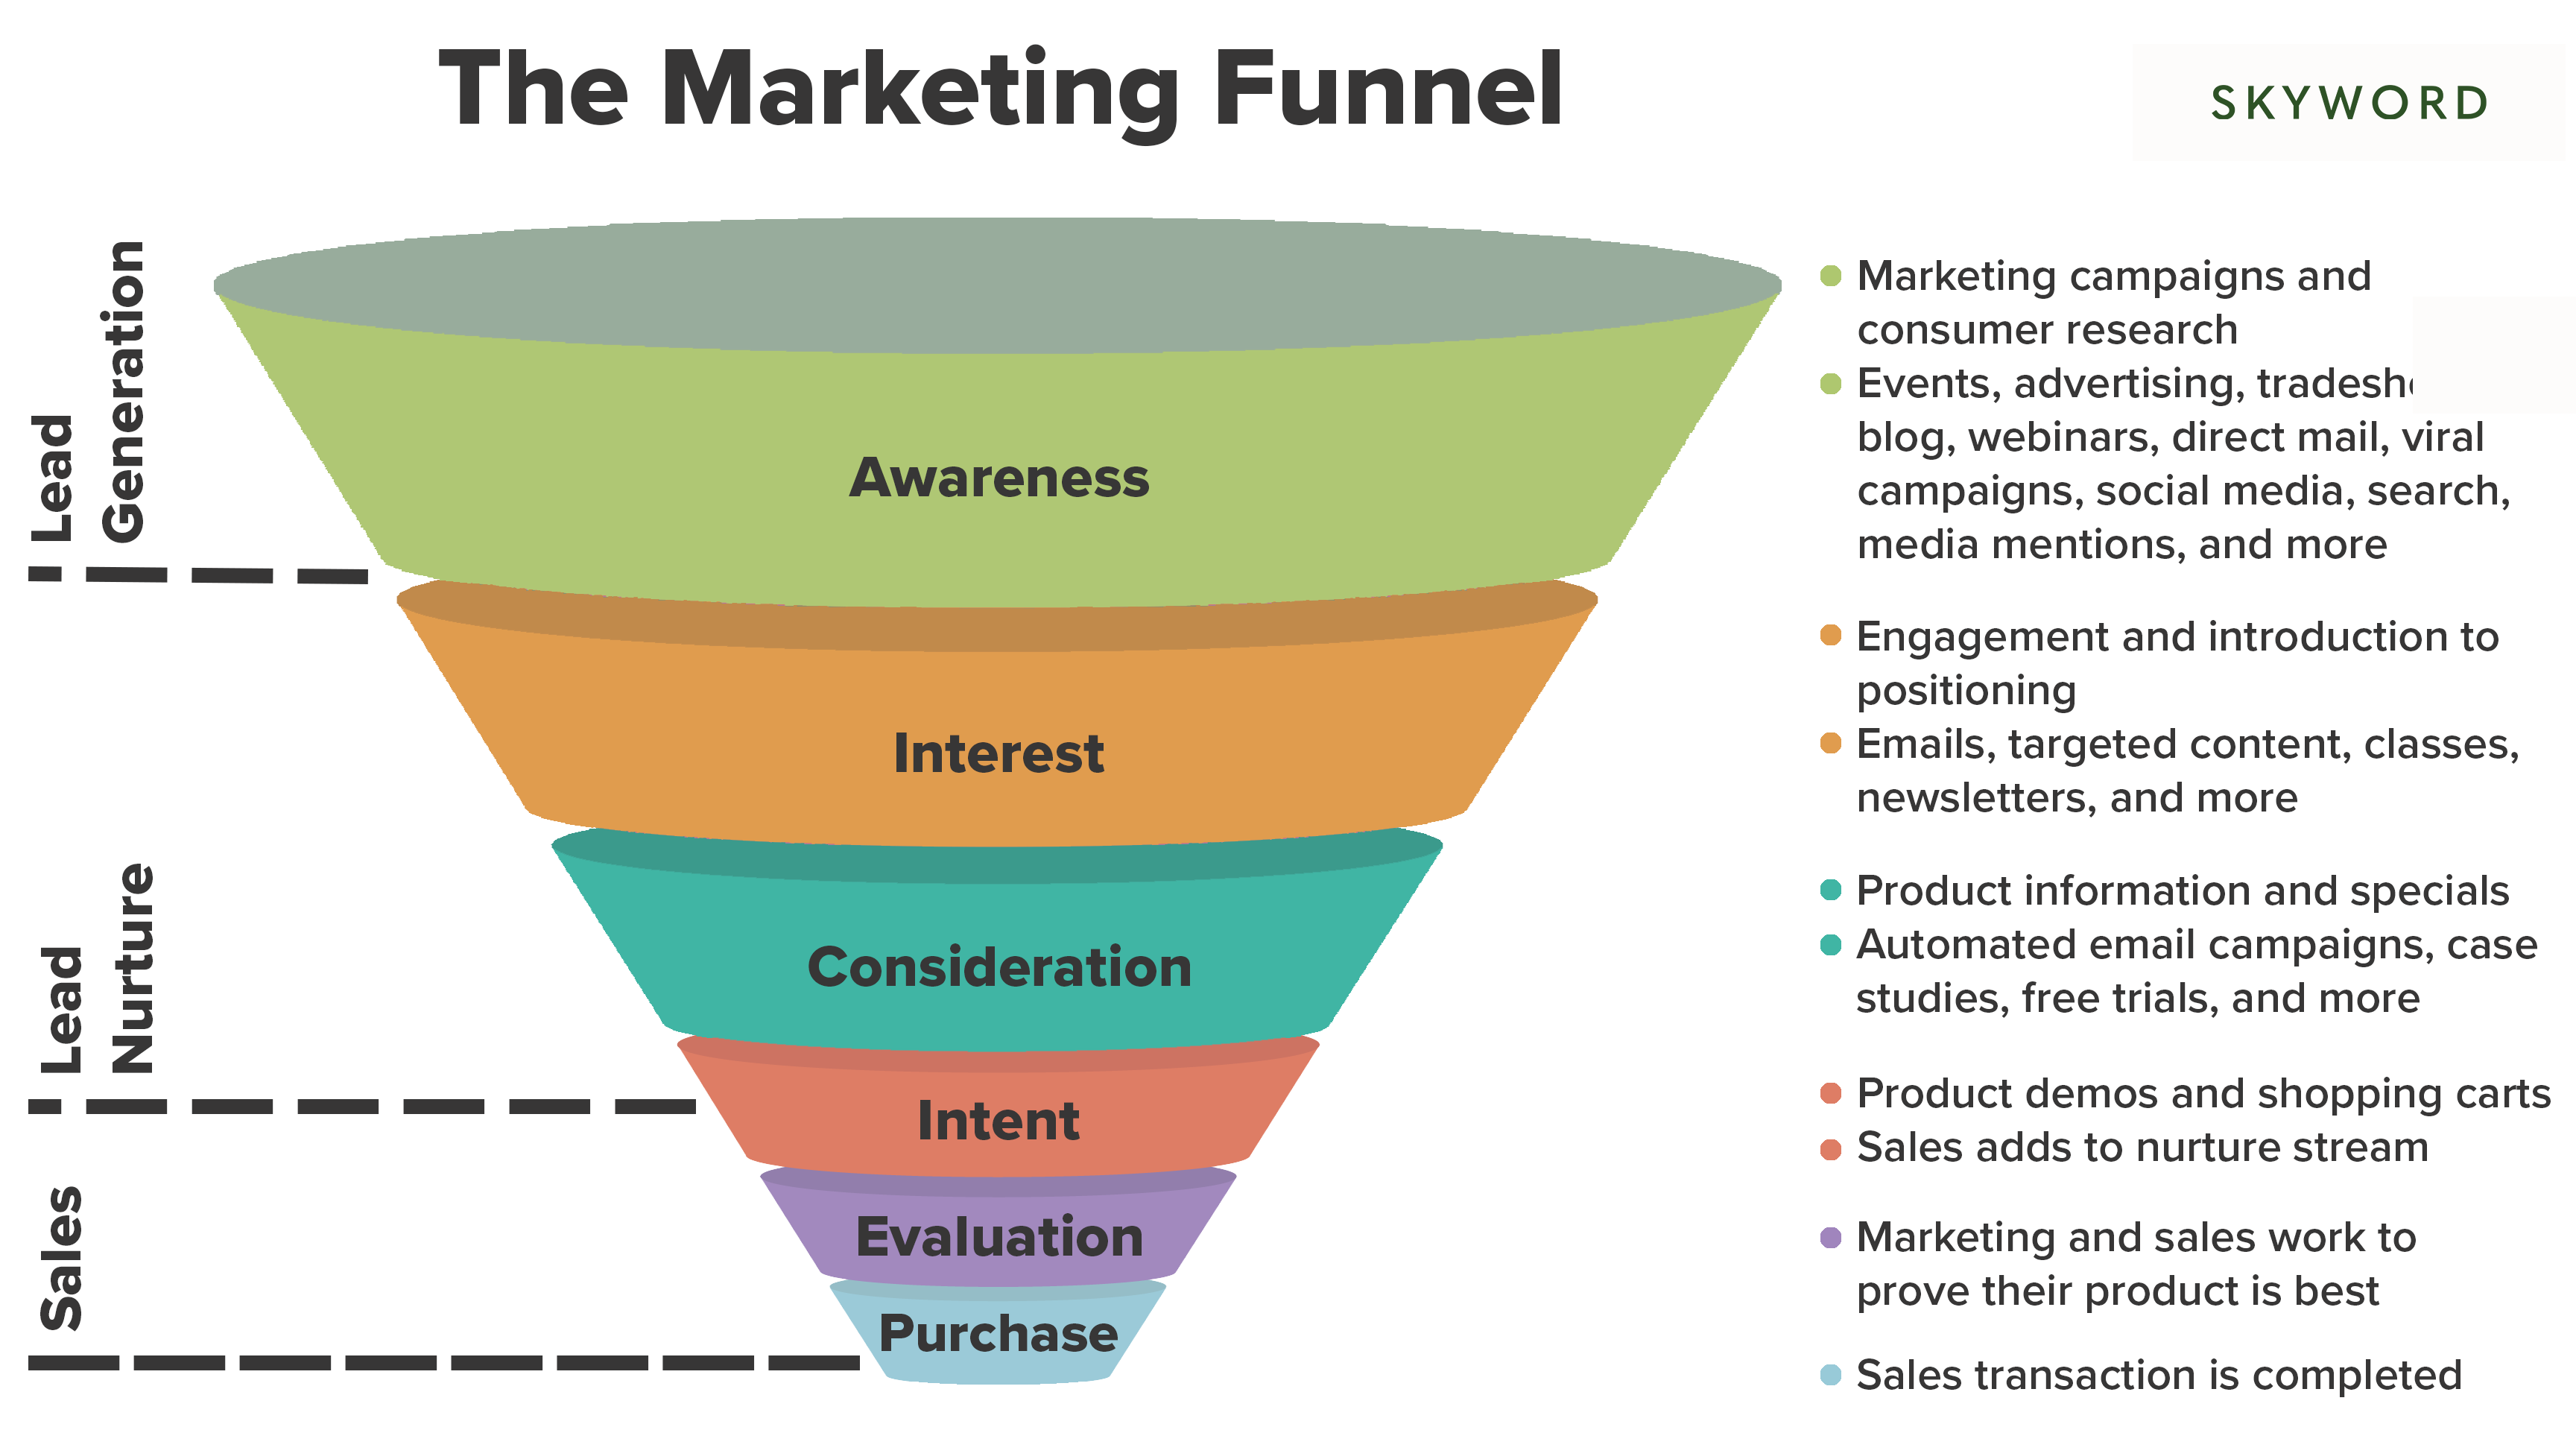 How the Marketing Funnel Works From Top to Bottom